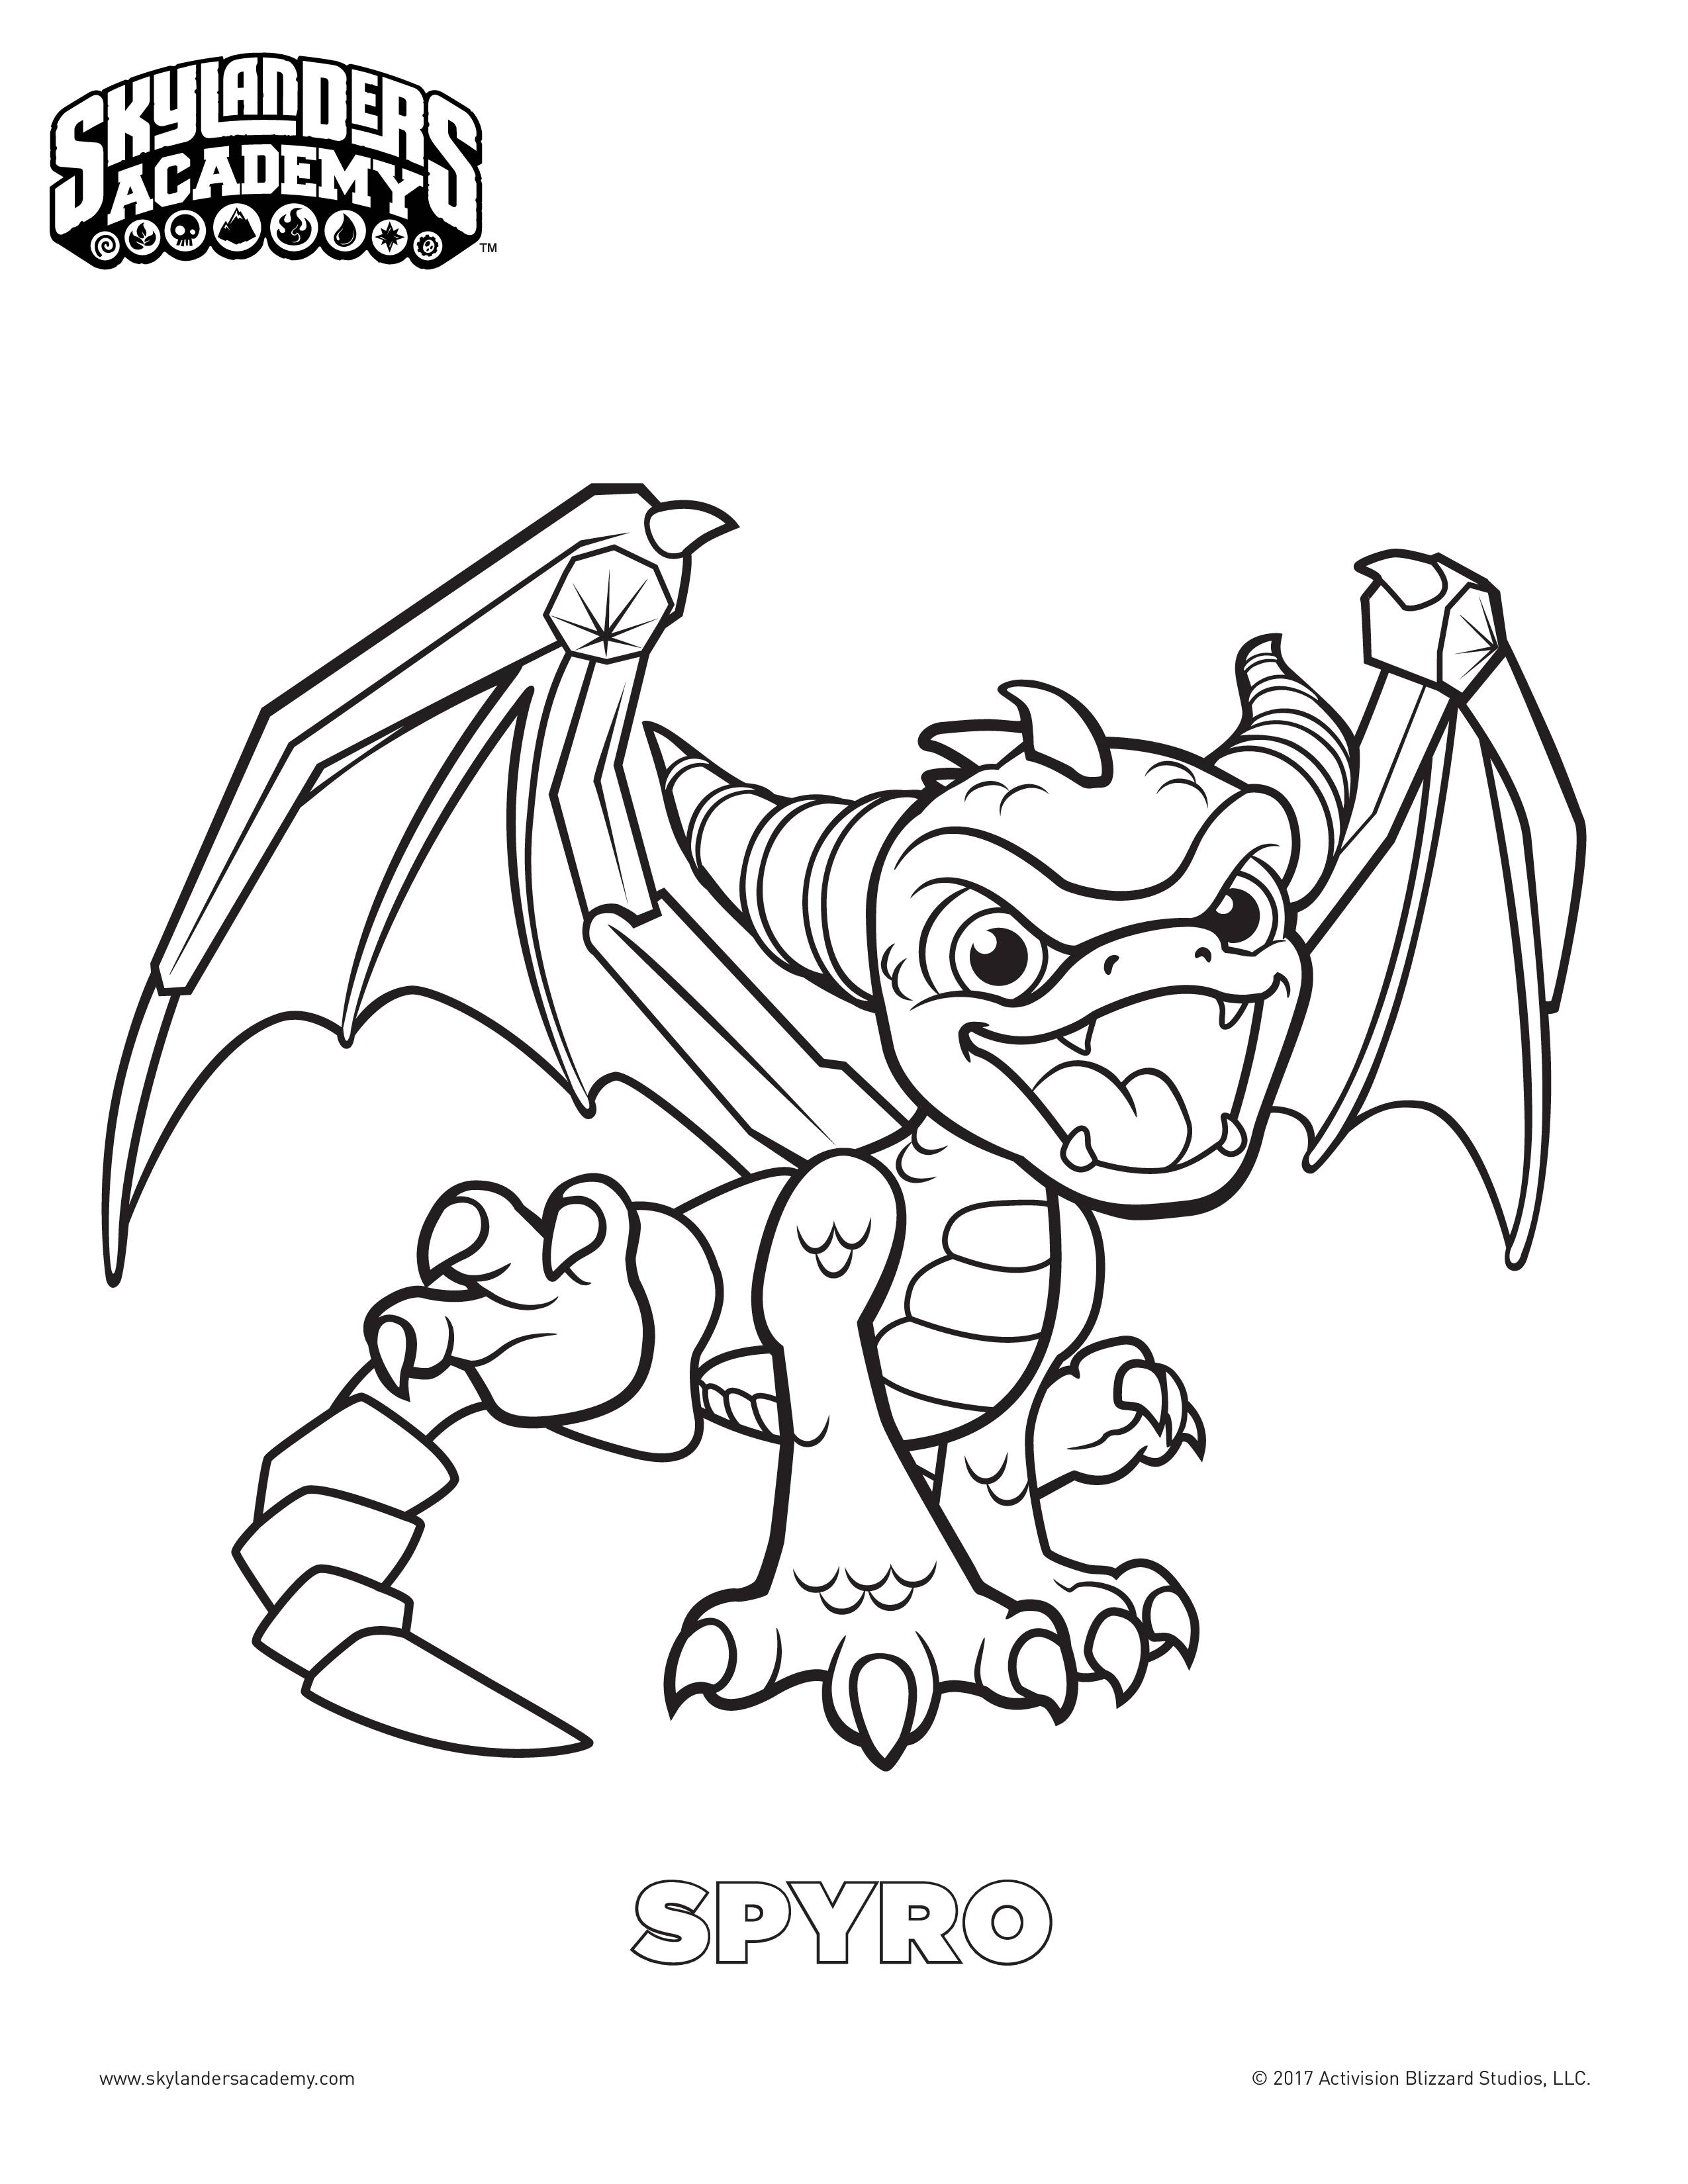 Spyro Coloring Page at GetColorings.com | Free printable colorings